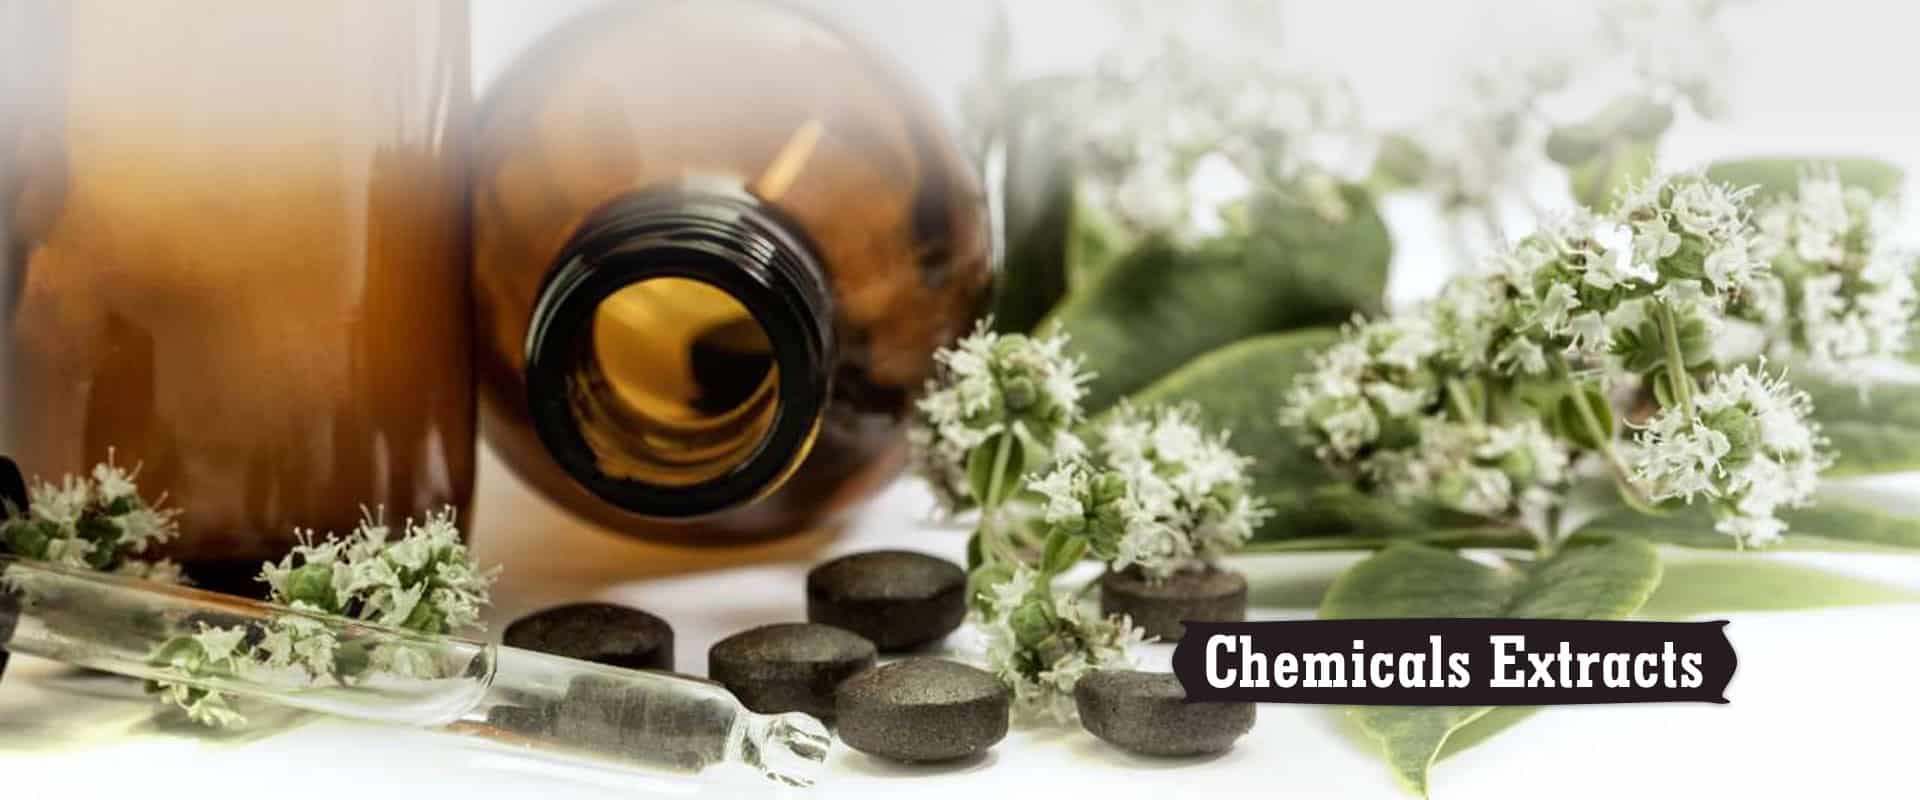 Chemicals Extracts Manufacturer and Supplier